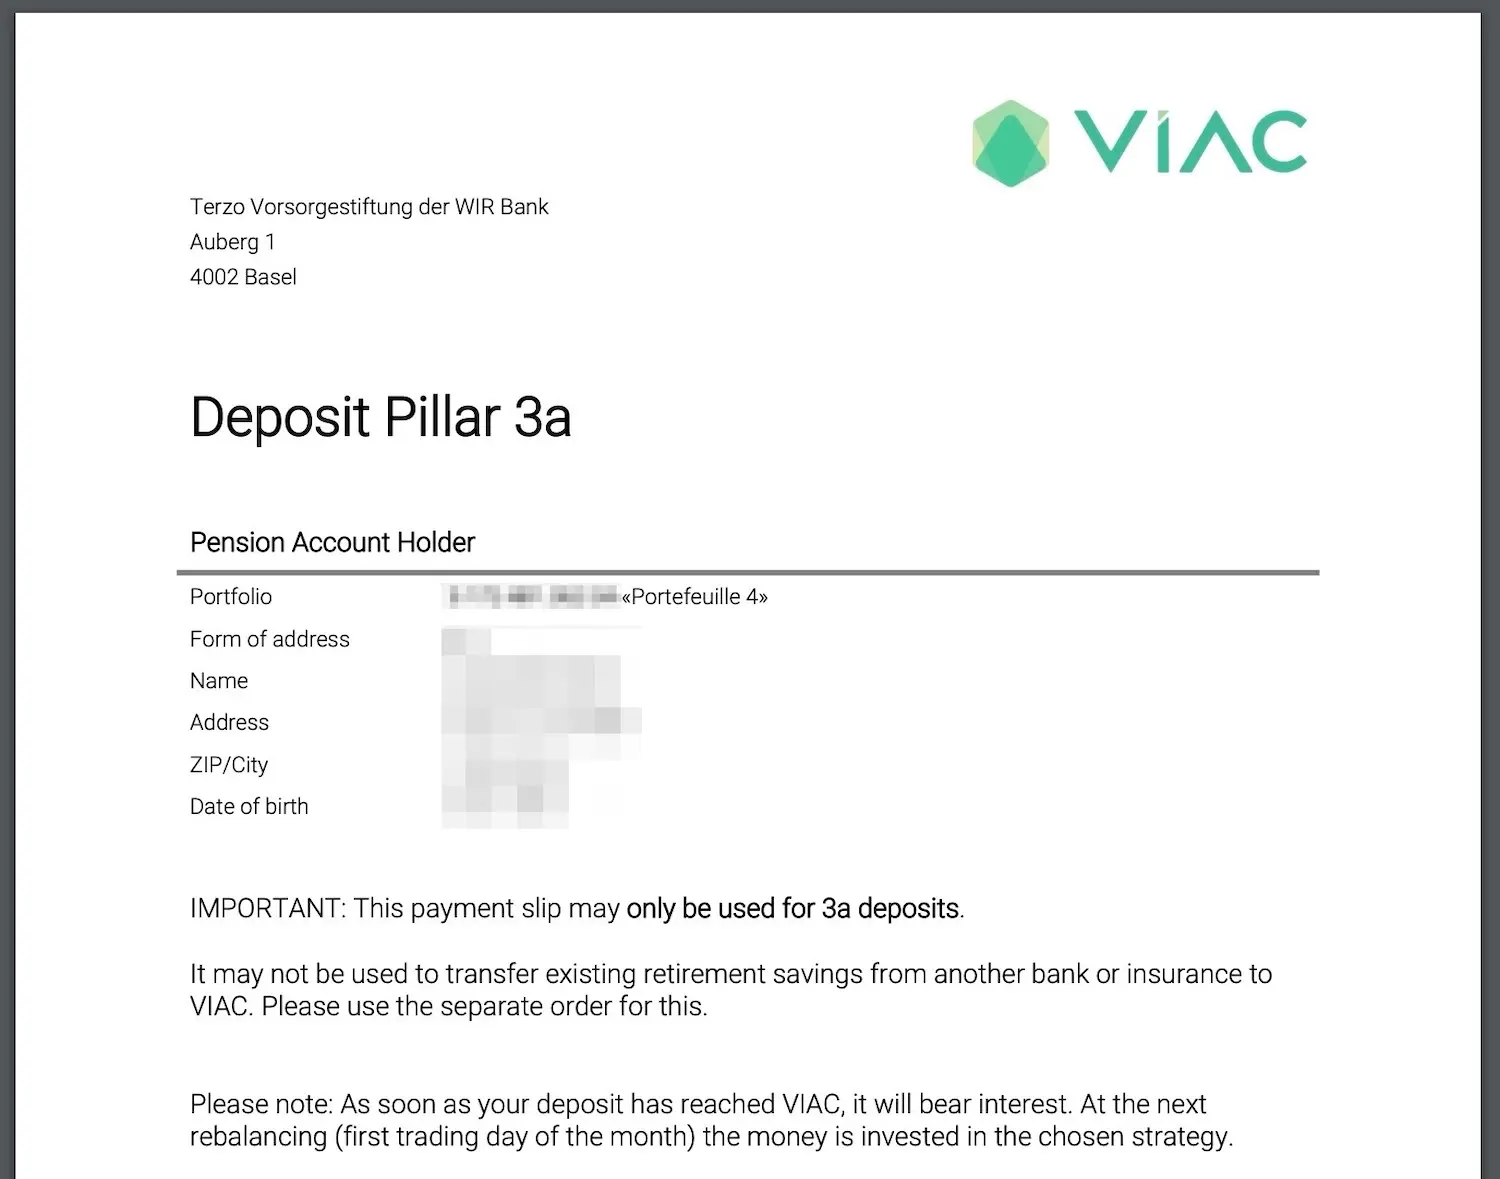 The PDF with the payment information for your VIAC pillar 3a account looks like this